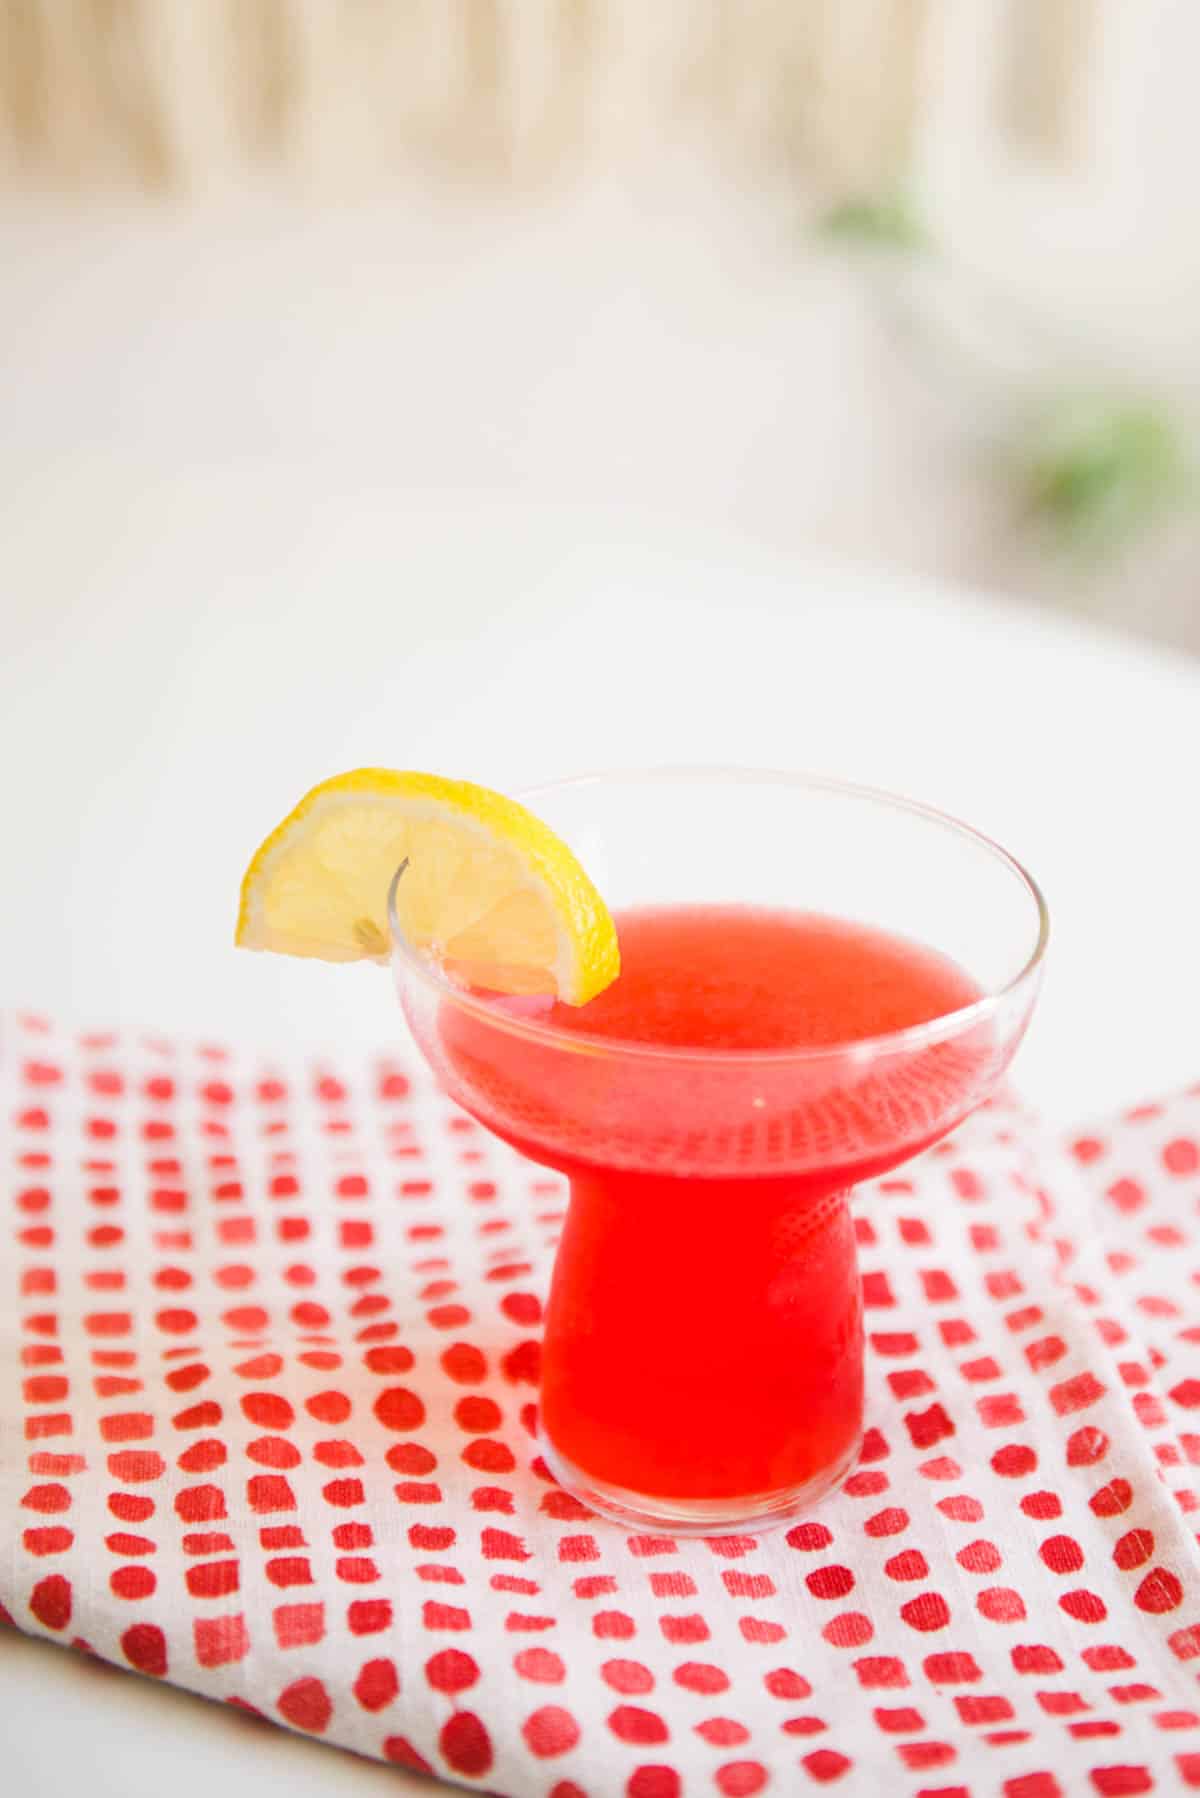 A glass on a cloth napkin on a table with a bright pink cocktail in it.